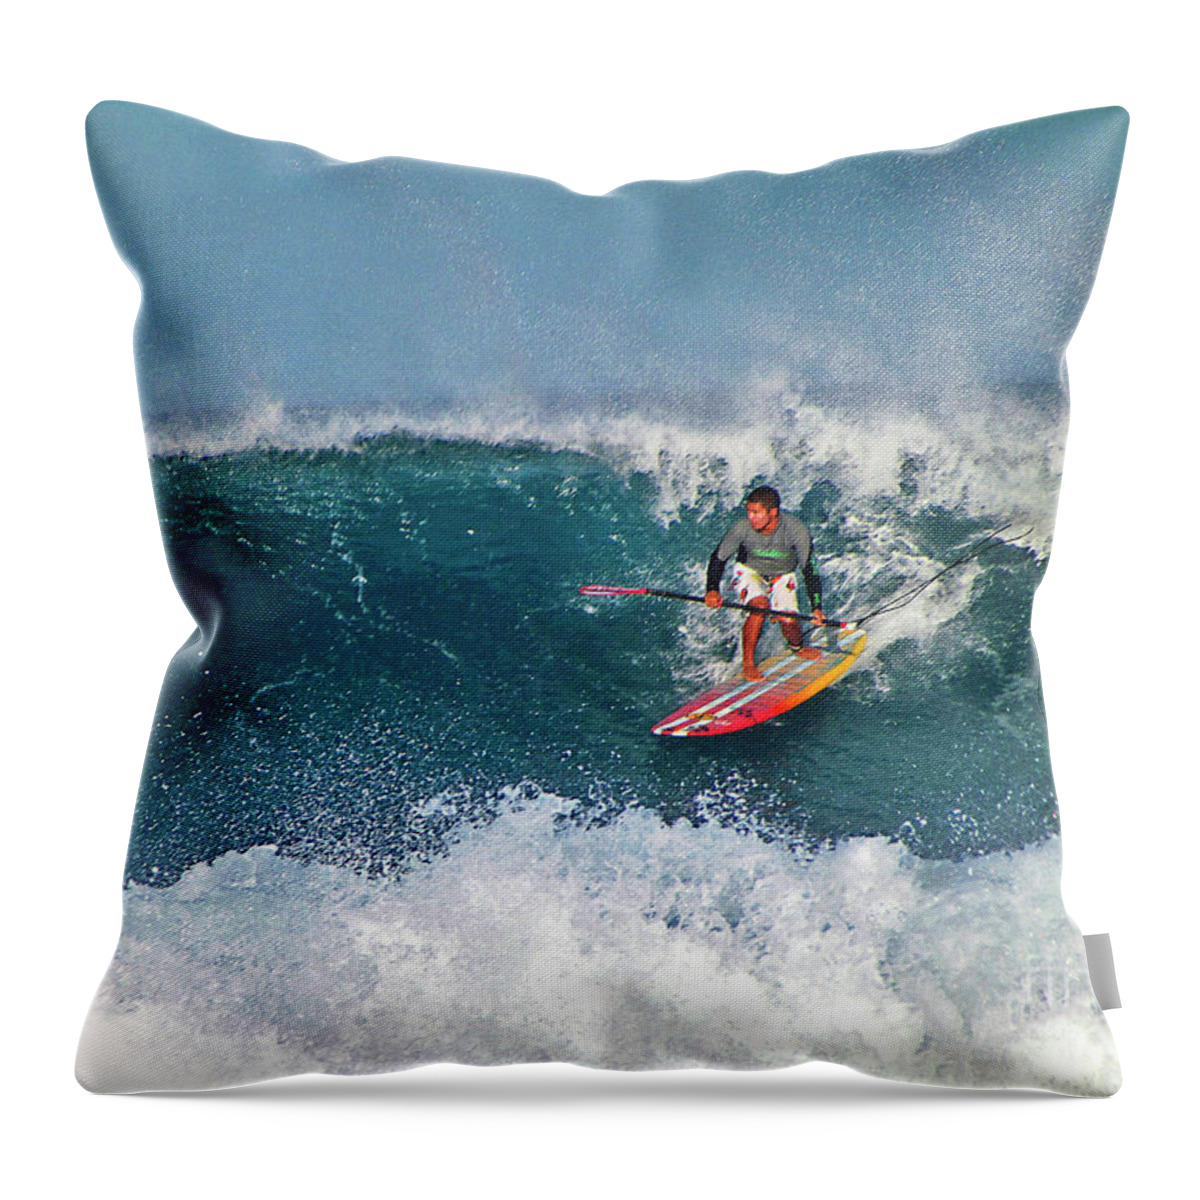 Paddleboard Surfer Throw Pillow featuring the photograph Paddleboarder Rides the Break by Bette Phelan